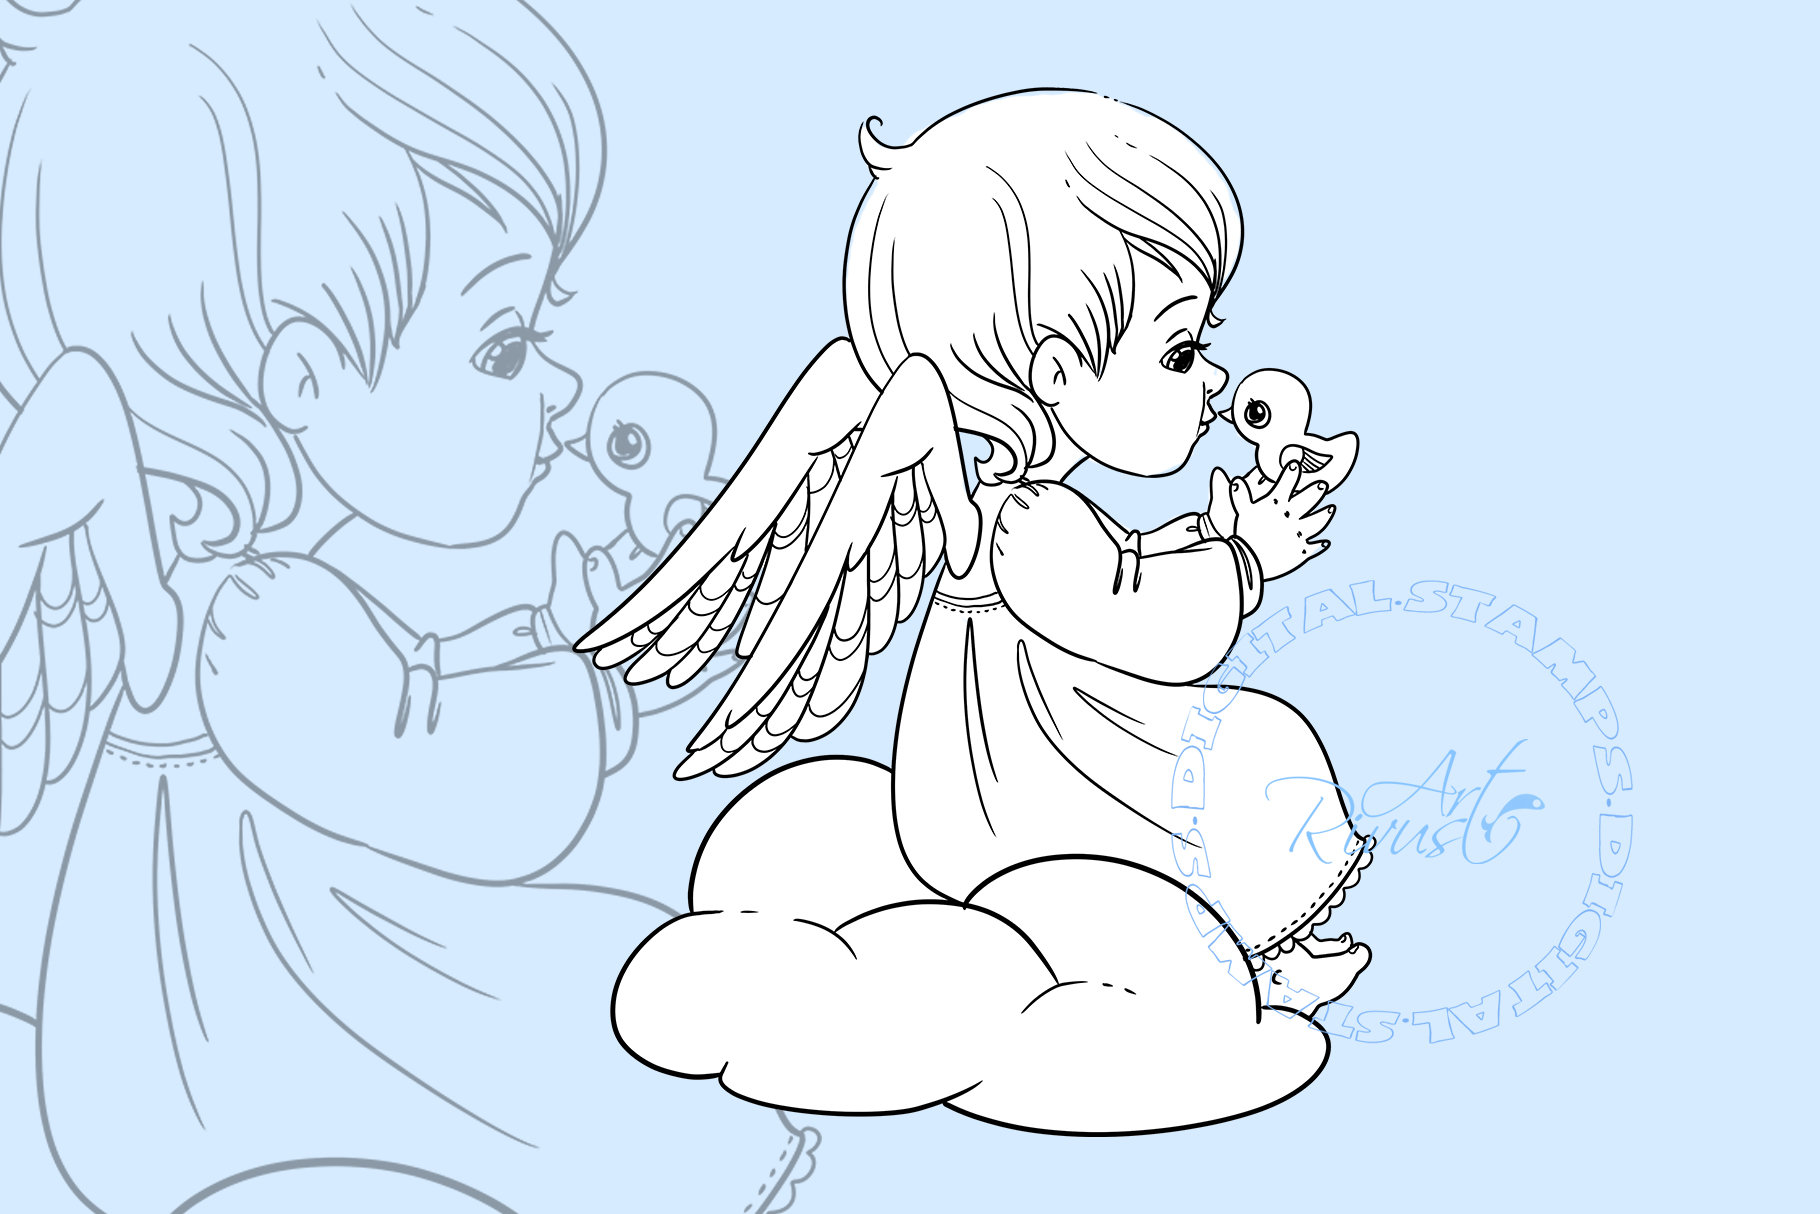 precious moments boy praying coloring pages